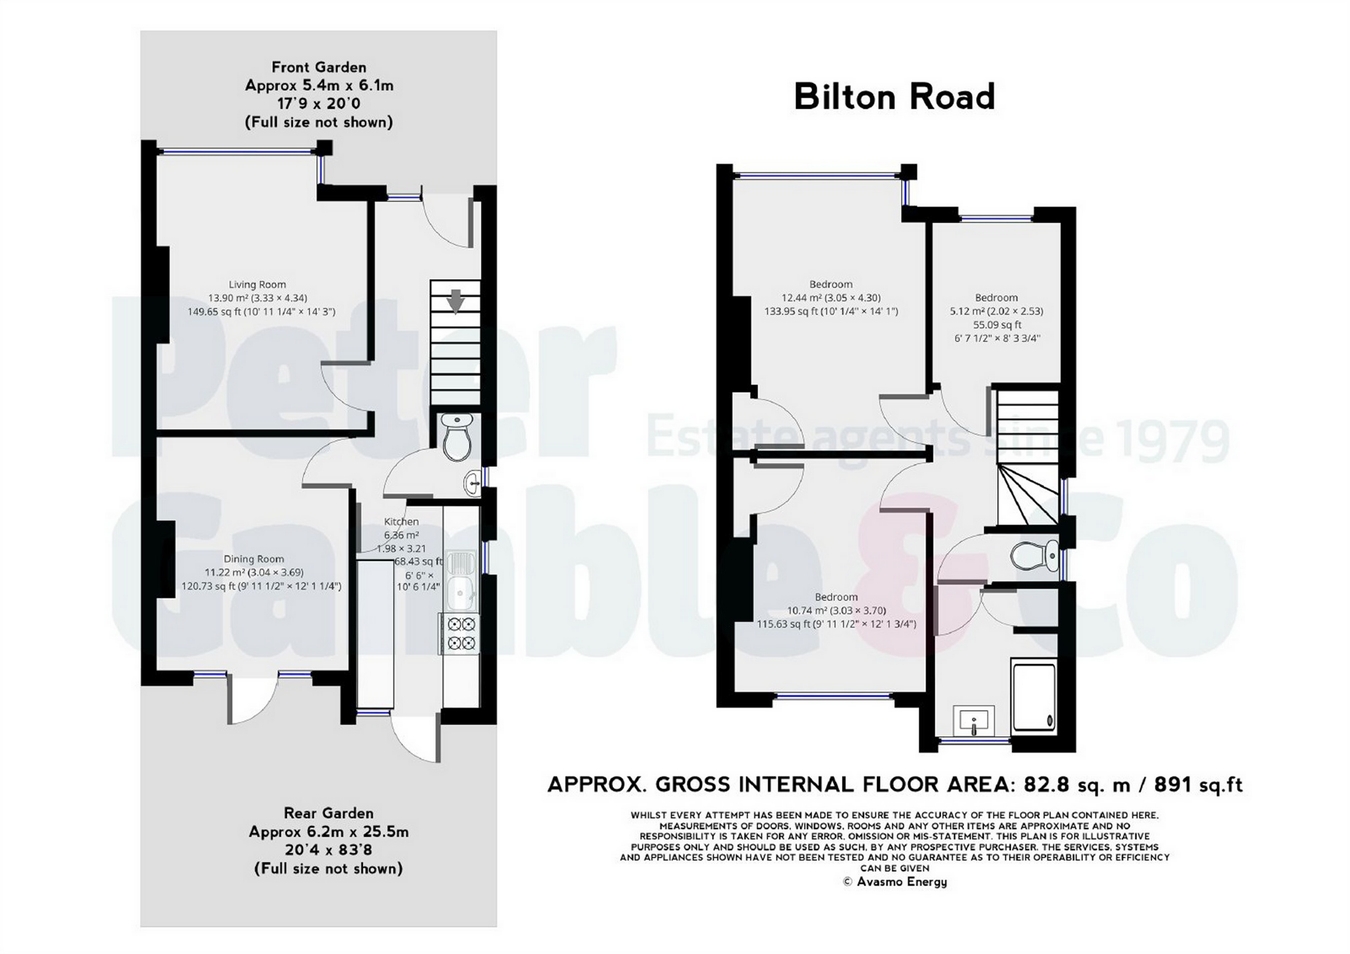 3 Bedrooms Semi-detached house for sale in Bilton Road, Perivale, Greenford, Greater London UB6